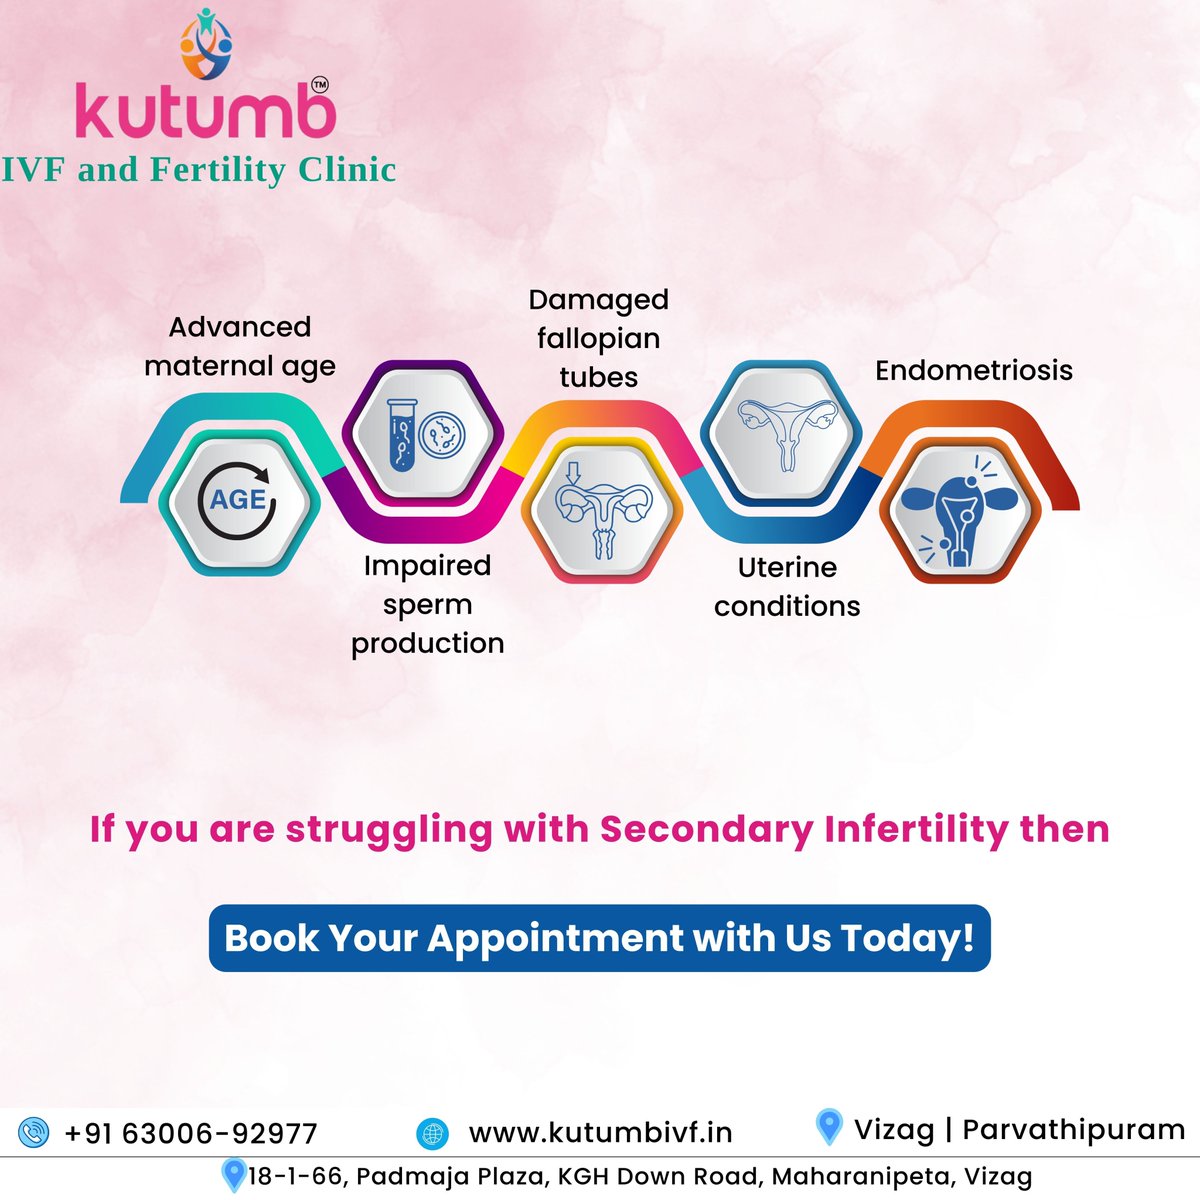 Secondary infertility can be attributed to various factors such as advanced maternal age, impaired sperm production, damaged fallopian tubes, endometriosis, and uterine conditions. Call us at +91 6300692977 #secondaryinfertility #InfertilitySolutions #ParenthoodDreams #BookNow